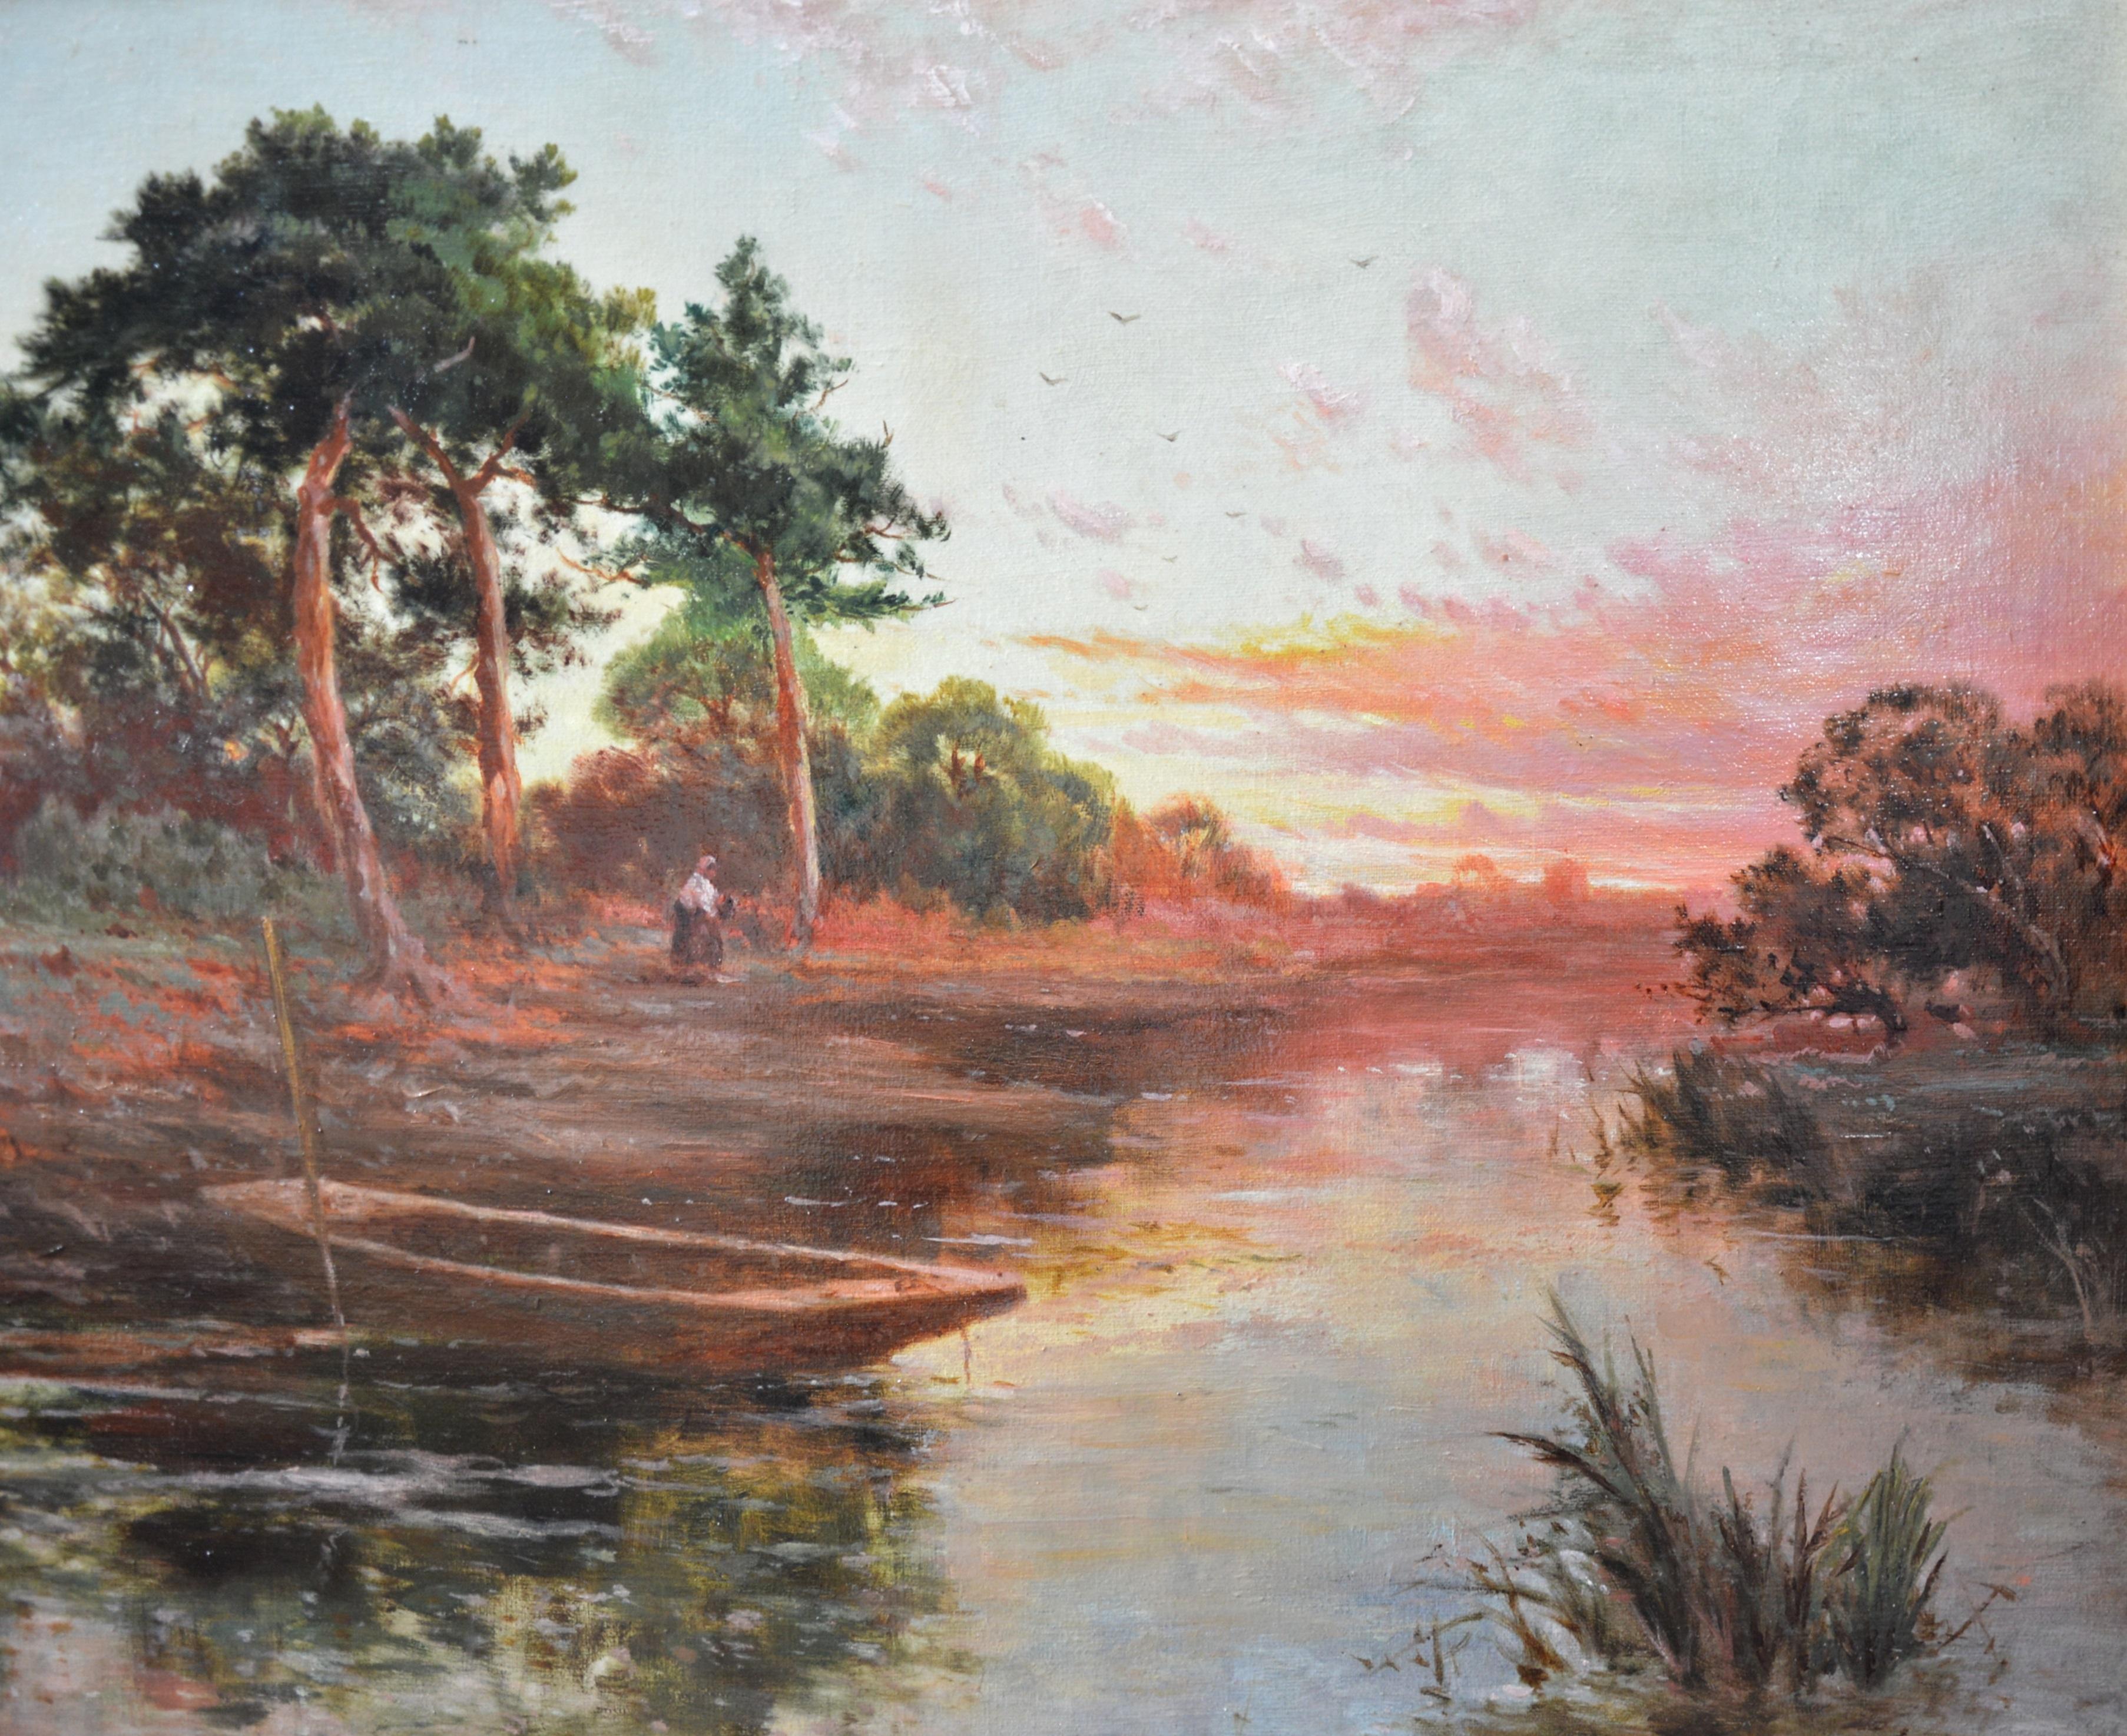 Sonning on Thames - 19th Century Sunset River Landscape Oil Painting  - Brown Landscape Painting by John Horace Hooper